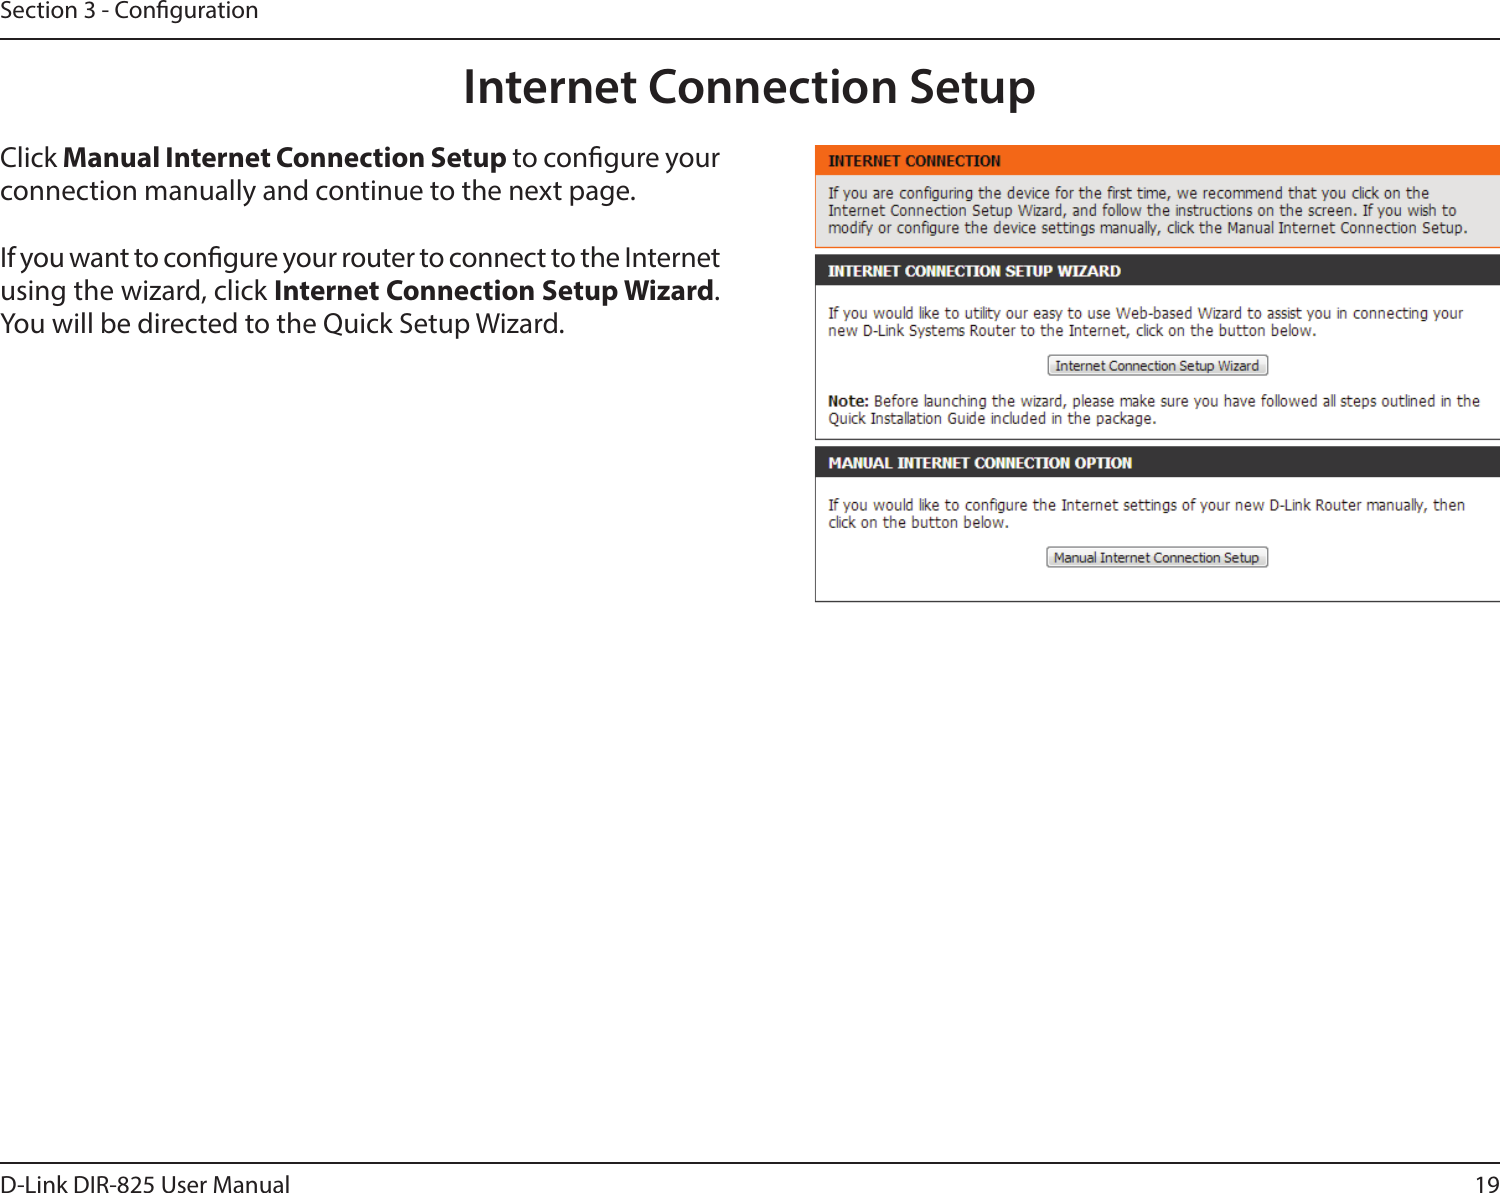 19D-Link DIR-825 User ManualSection 3 - CongurationInternet Connection SetupClick Manual Internet Connection Setup to congure your connection manually and continue to the next page.If you want to congure your router to connect to the Internet using the wizard, click Internet Connection Setup Wizard. You will be directed to the Quick Setup Wizard. 